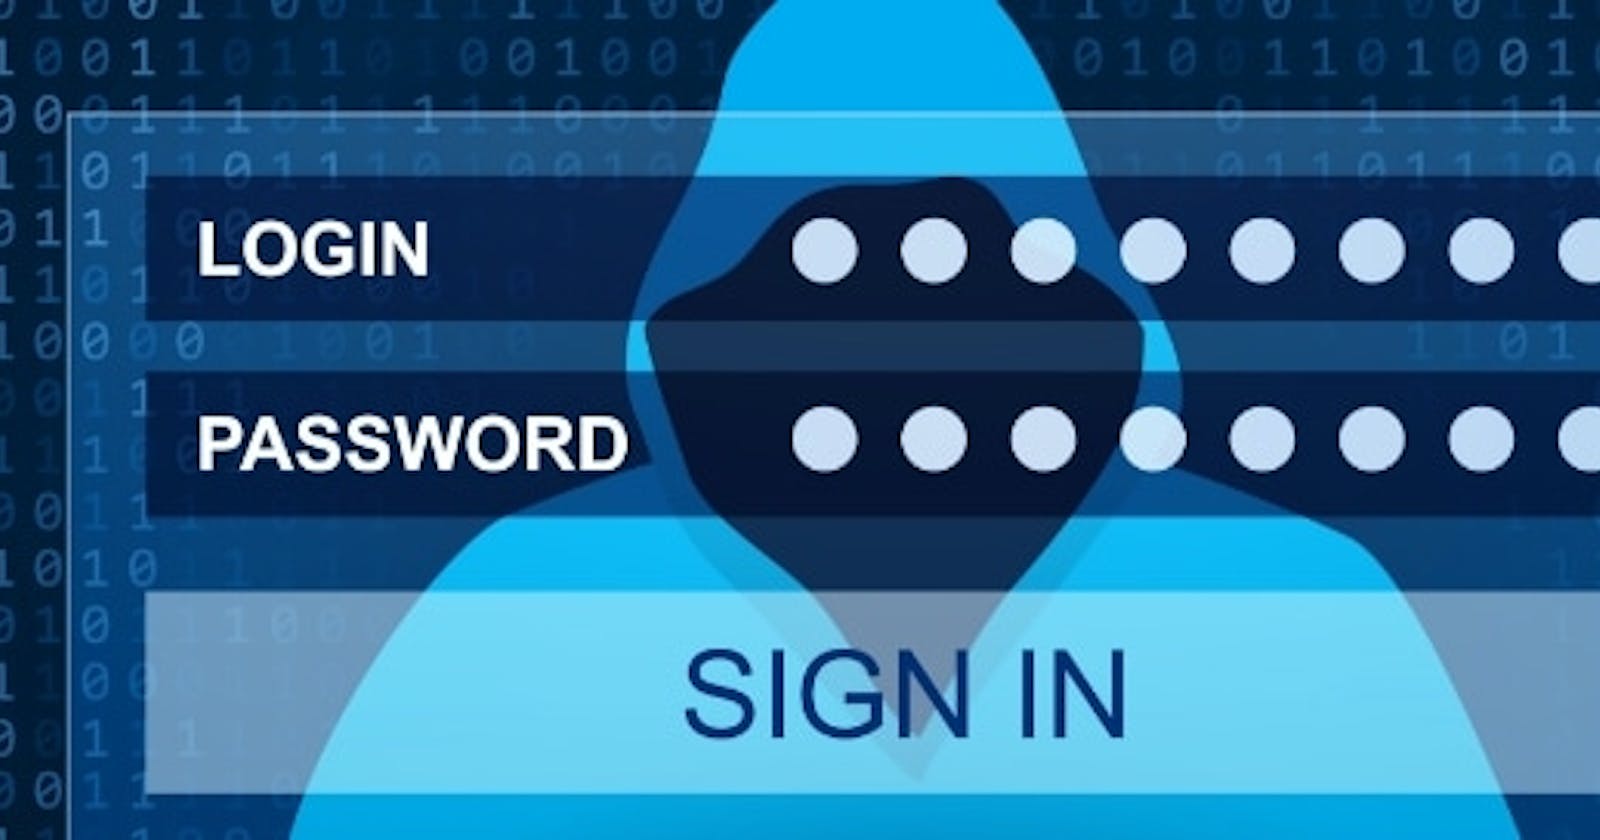 How are your passwords being stored?